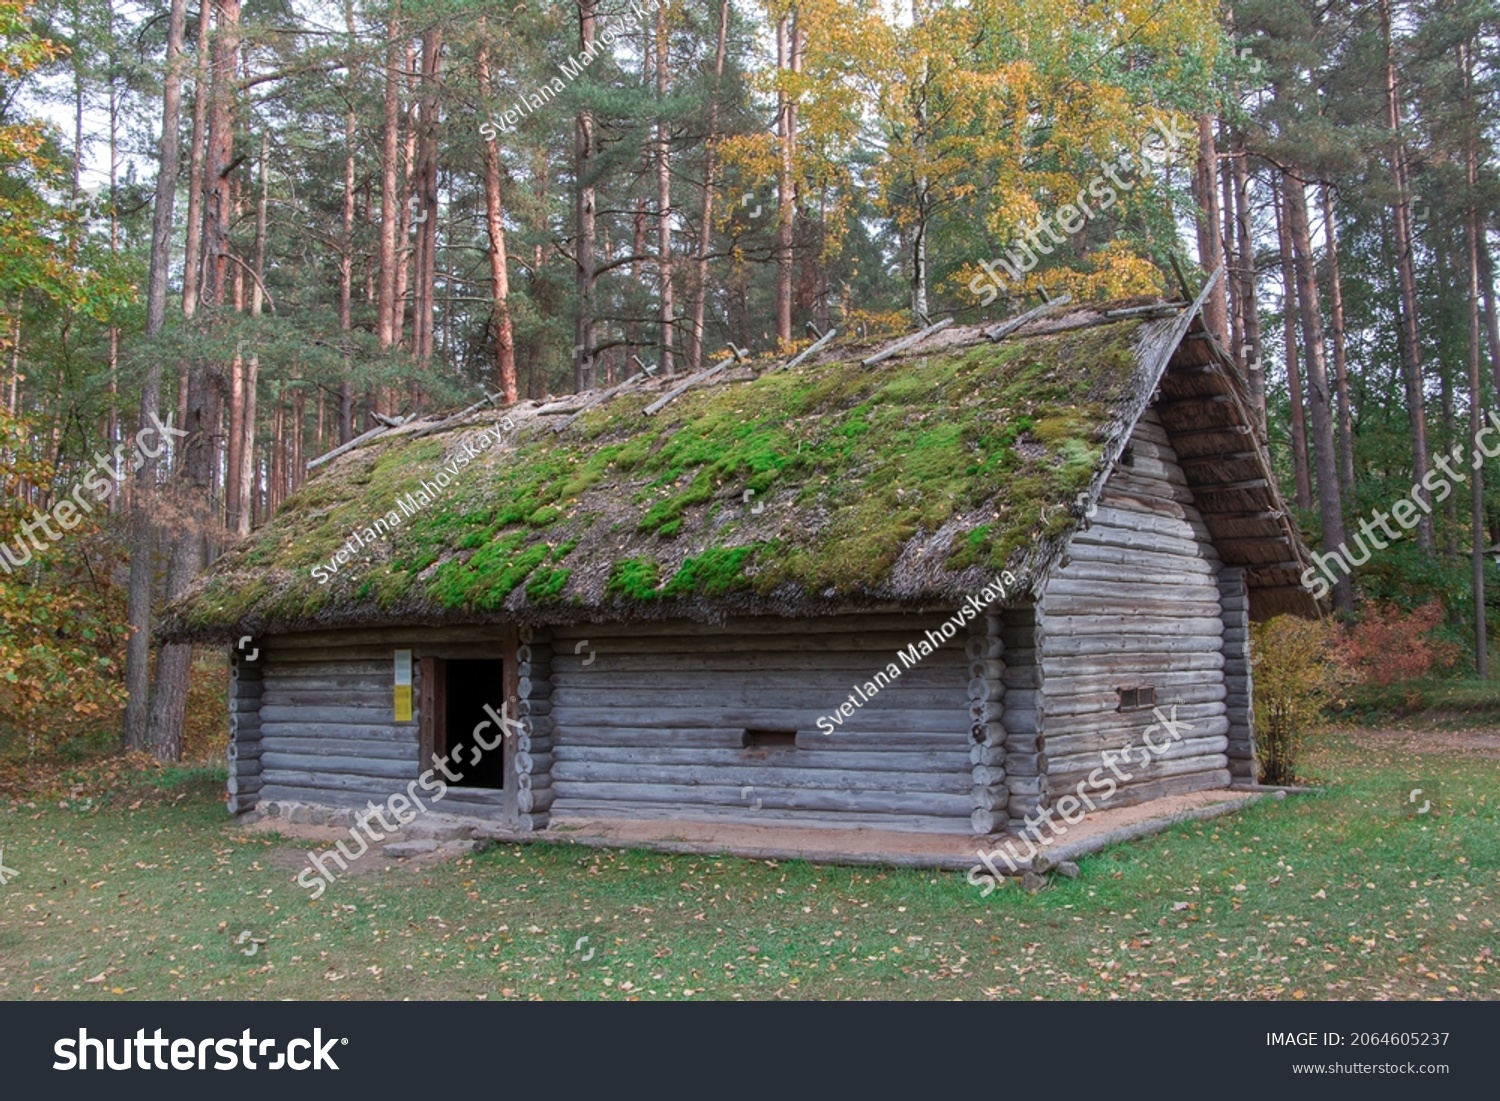 The  living house was built in 1750. The structure contains two spaces-anteroom and chimneyless room.   This building is a typical specimen of the 18th century Latvian peasant architectural traditions #2064605237